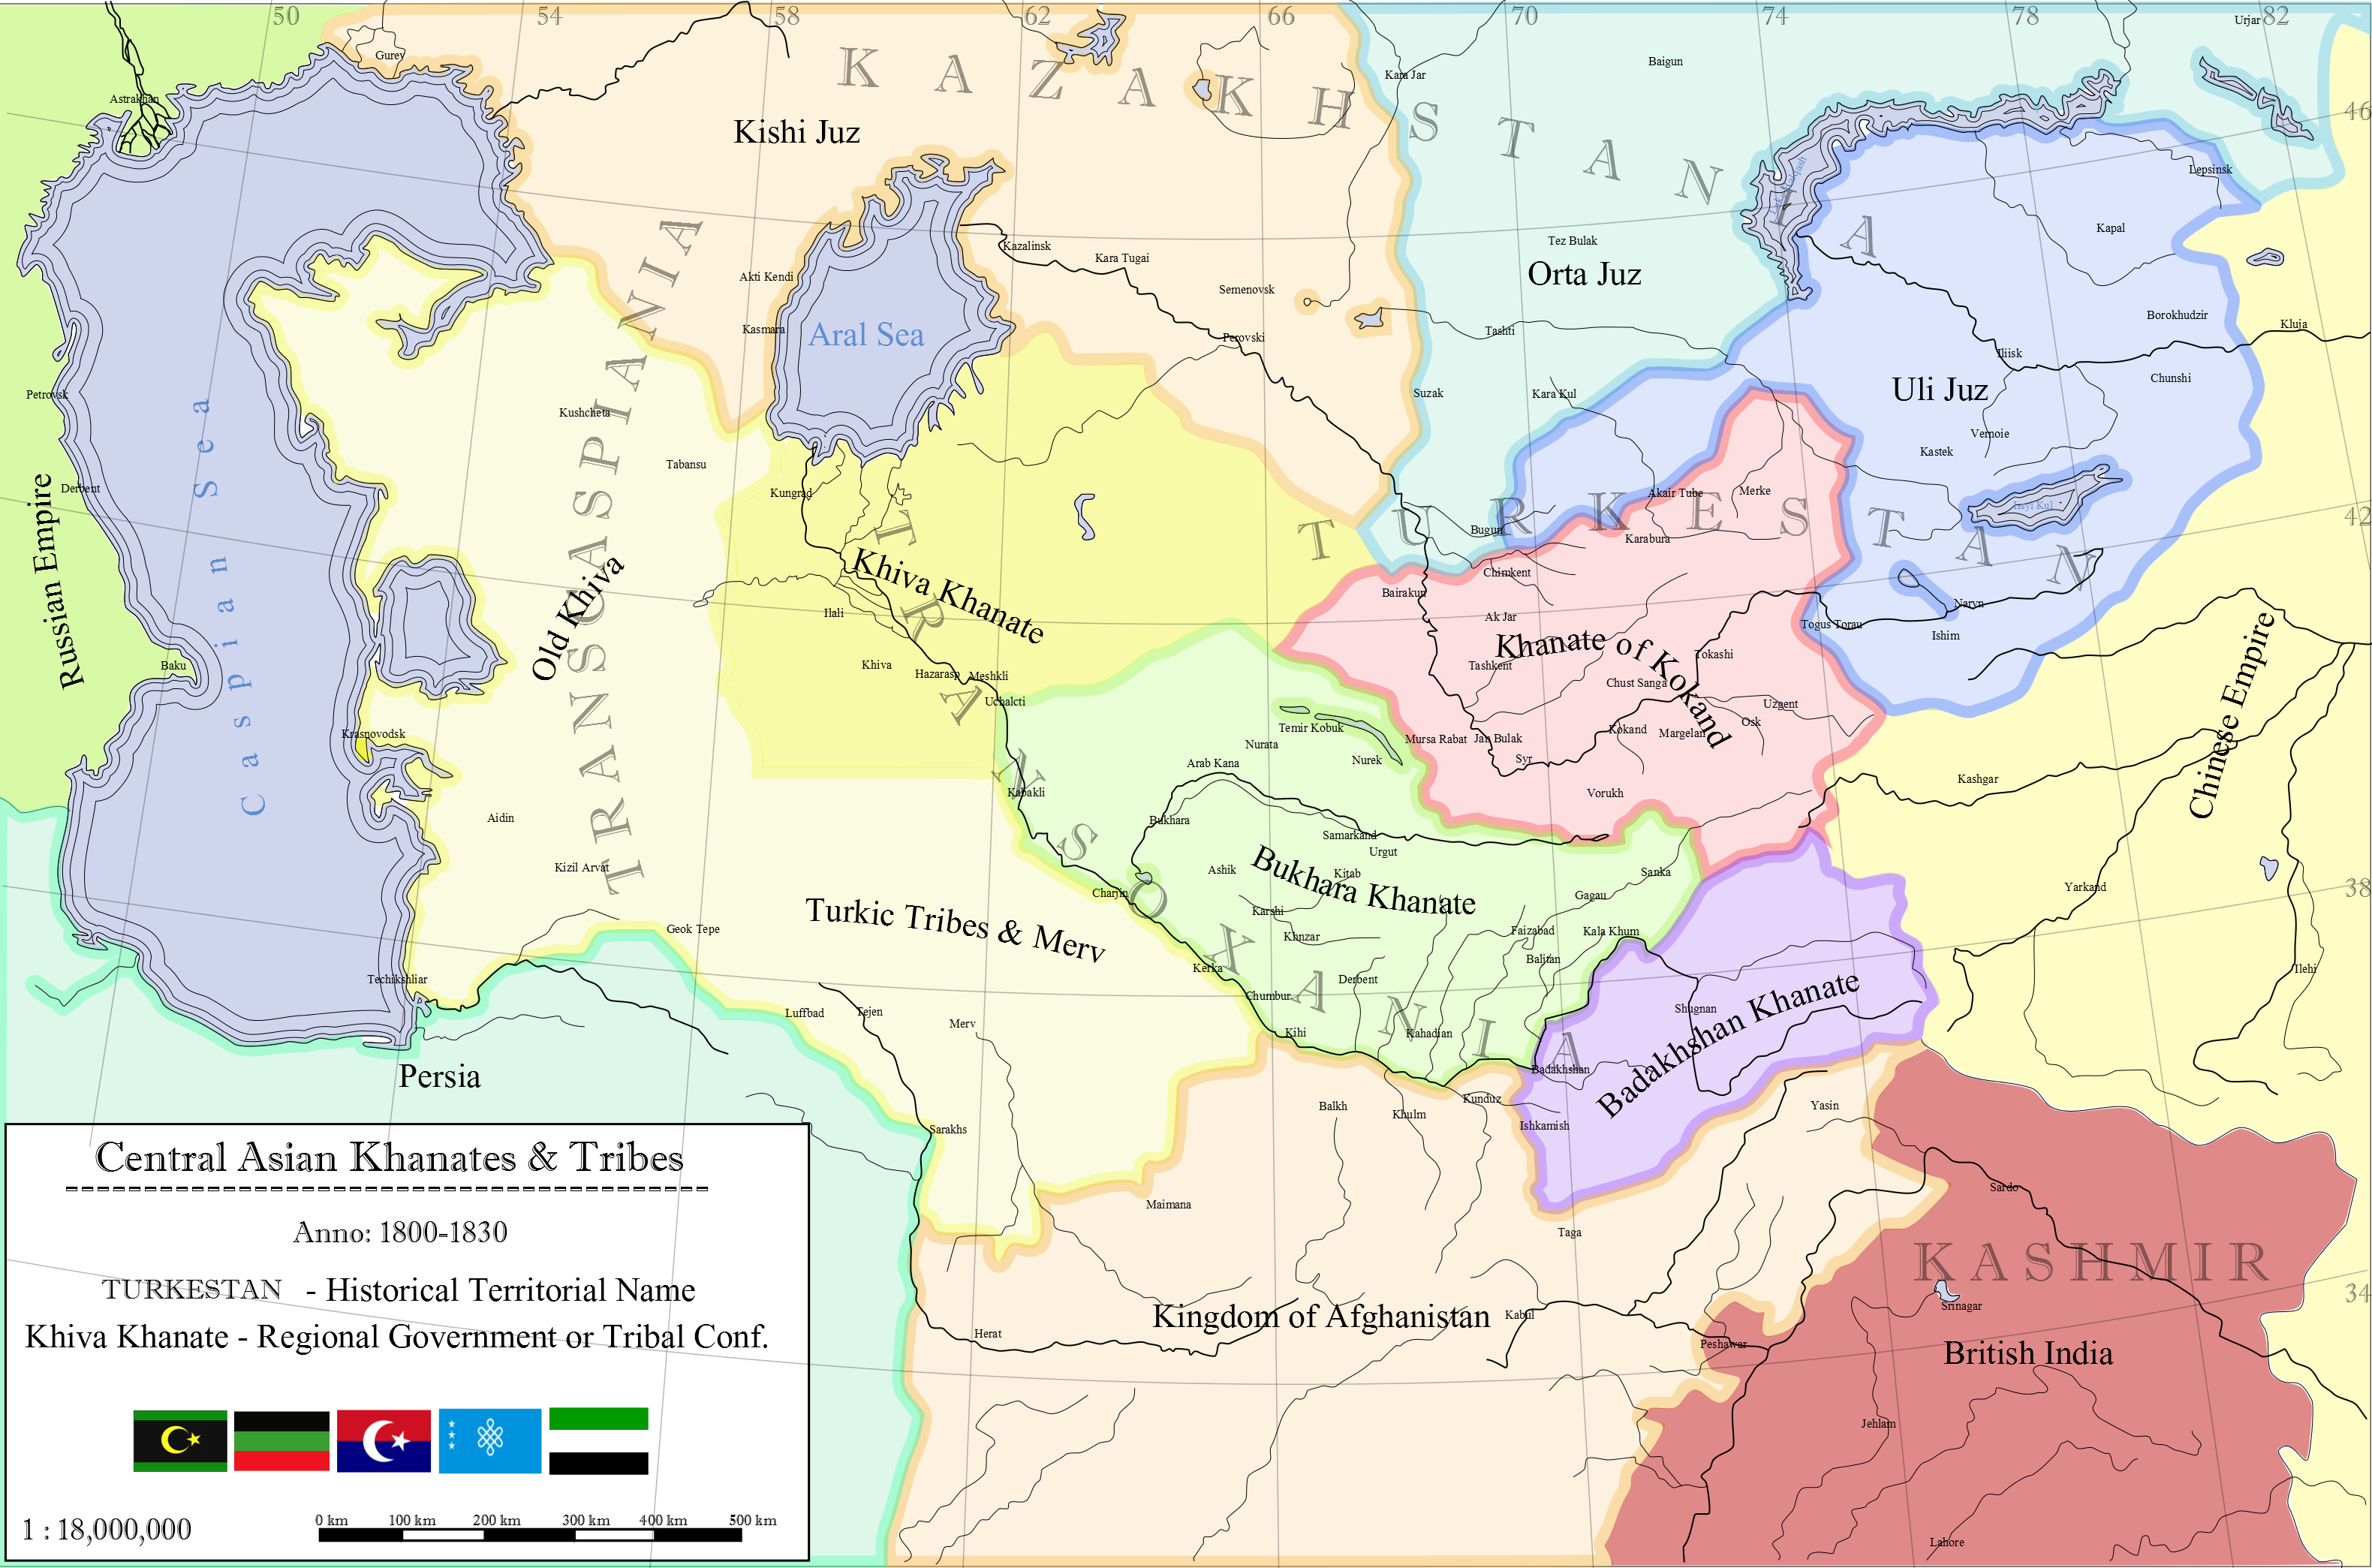 central_asian_khanates_and_tribes_by_zalezsky-d88v980.png